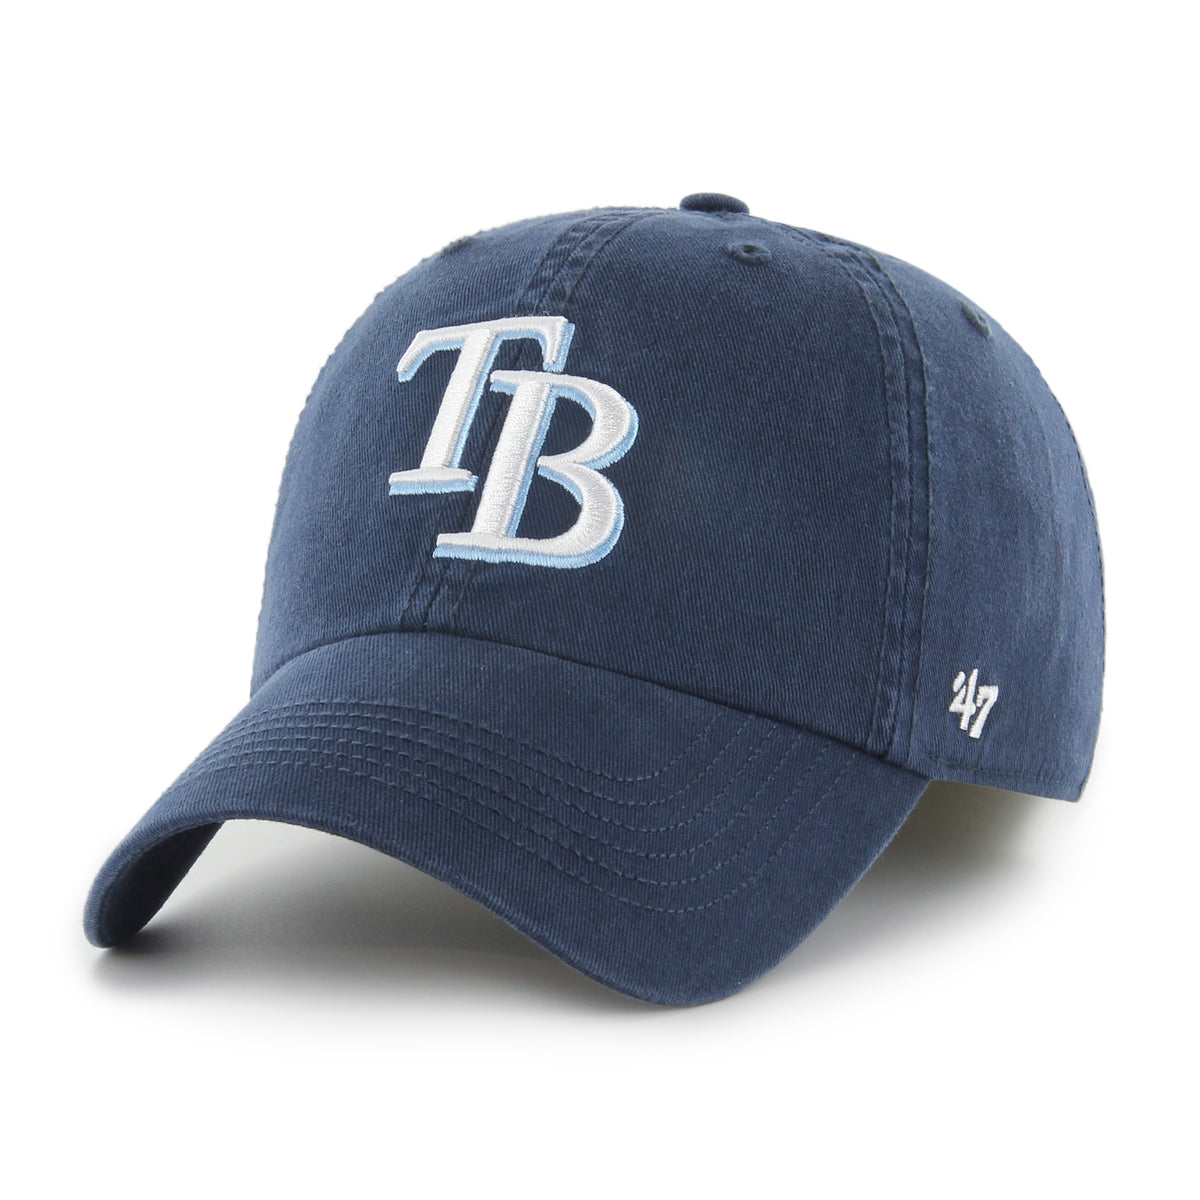 TAMPA BAY RAYS CLASSIC '47 FRANCHISE